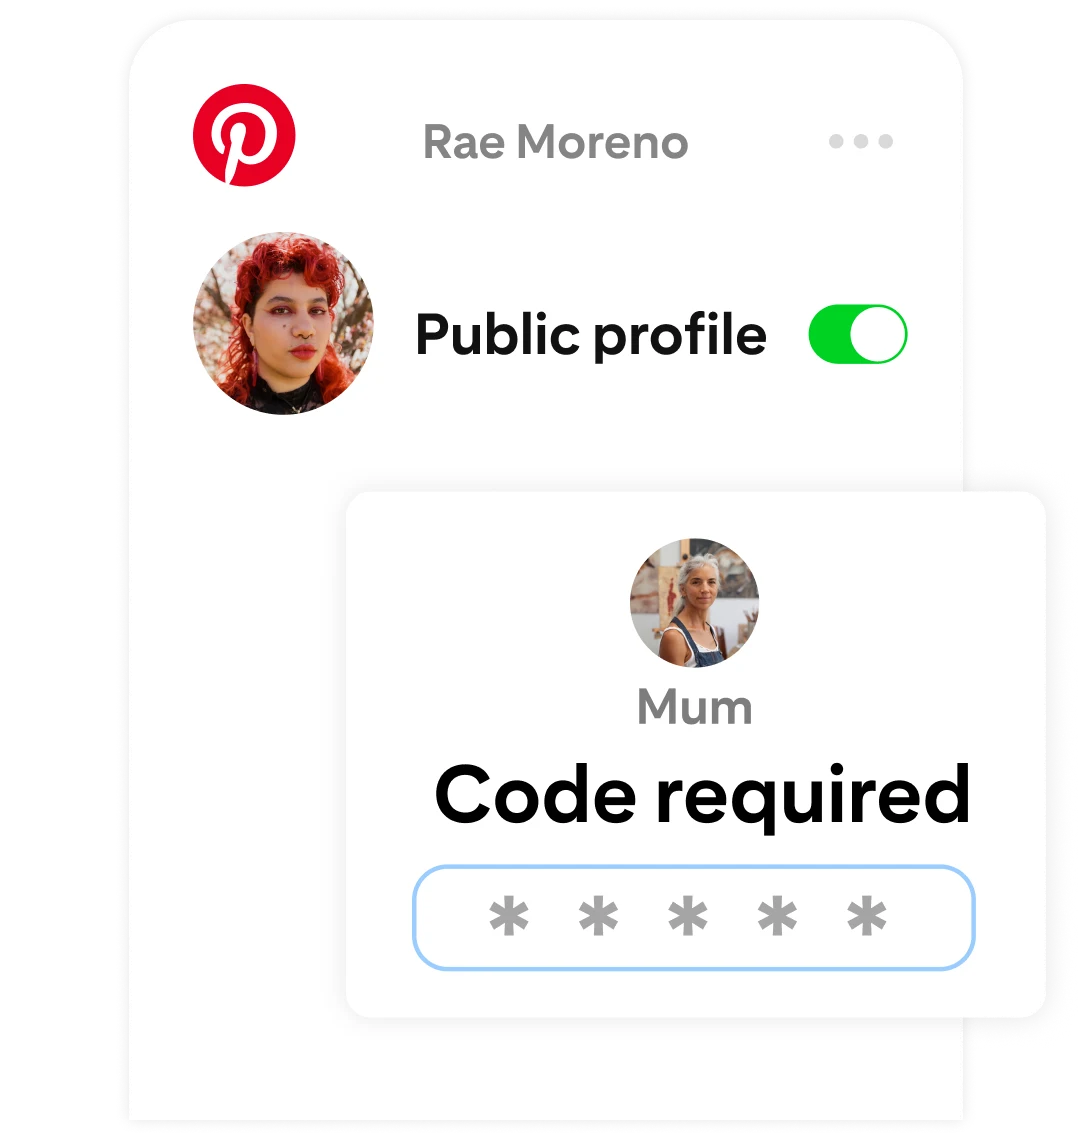 Rae Moreno's Pinterest settings page, where ‘Public profile’ is now toggled on, but a parent is required to enter a code to confirm the change.